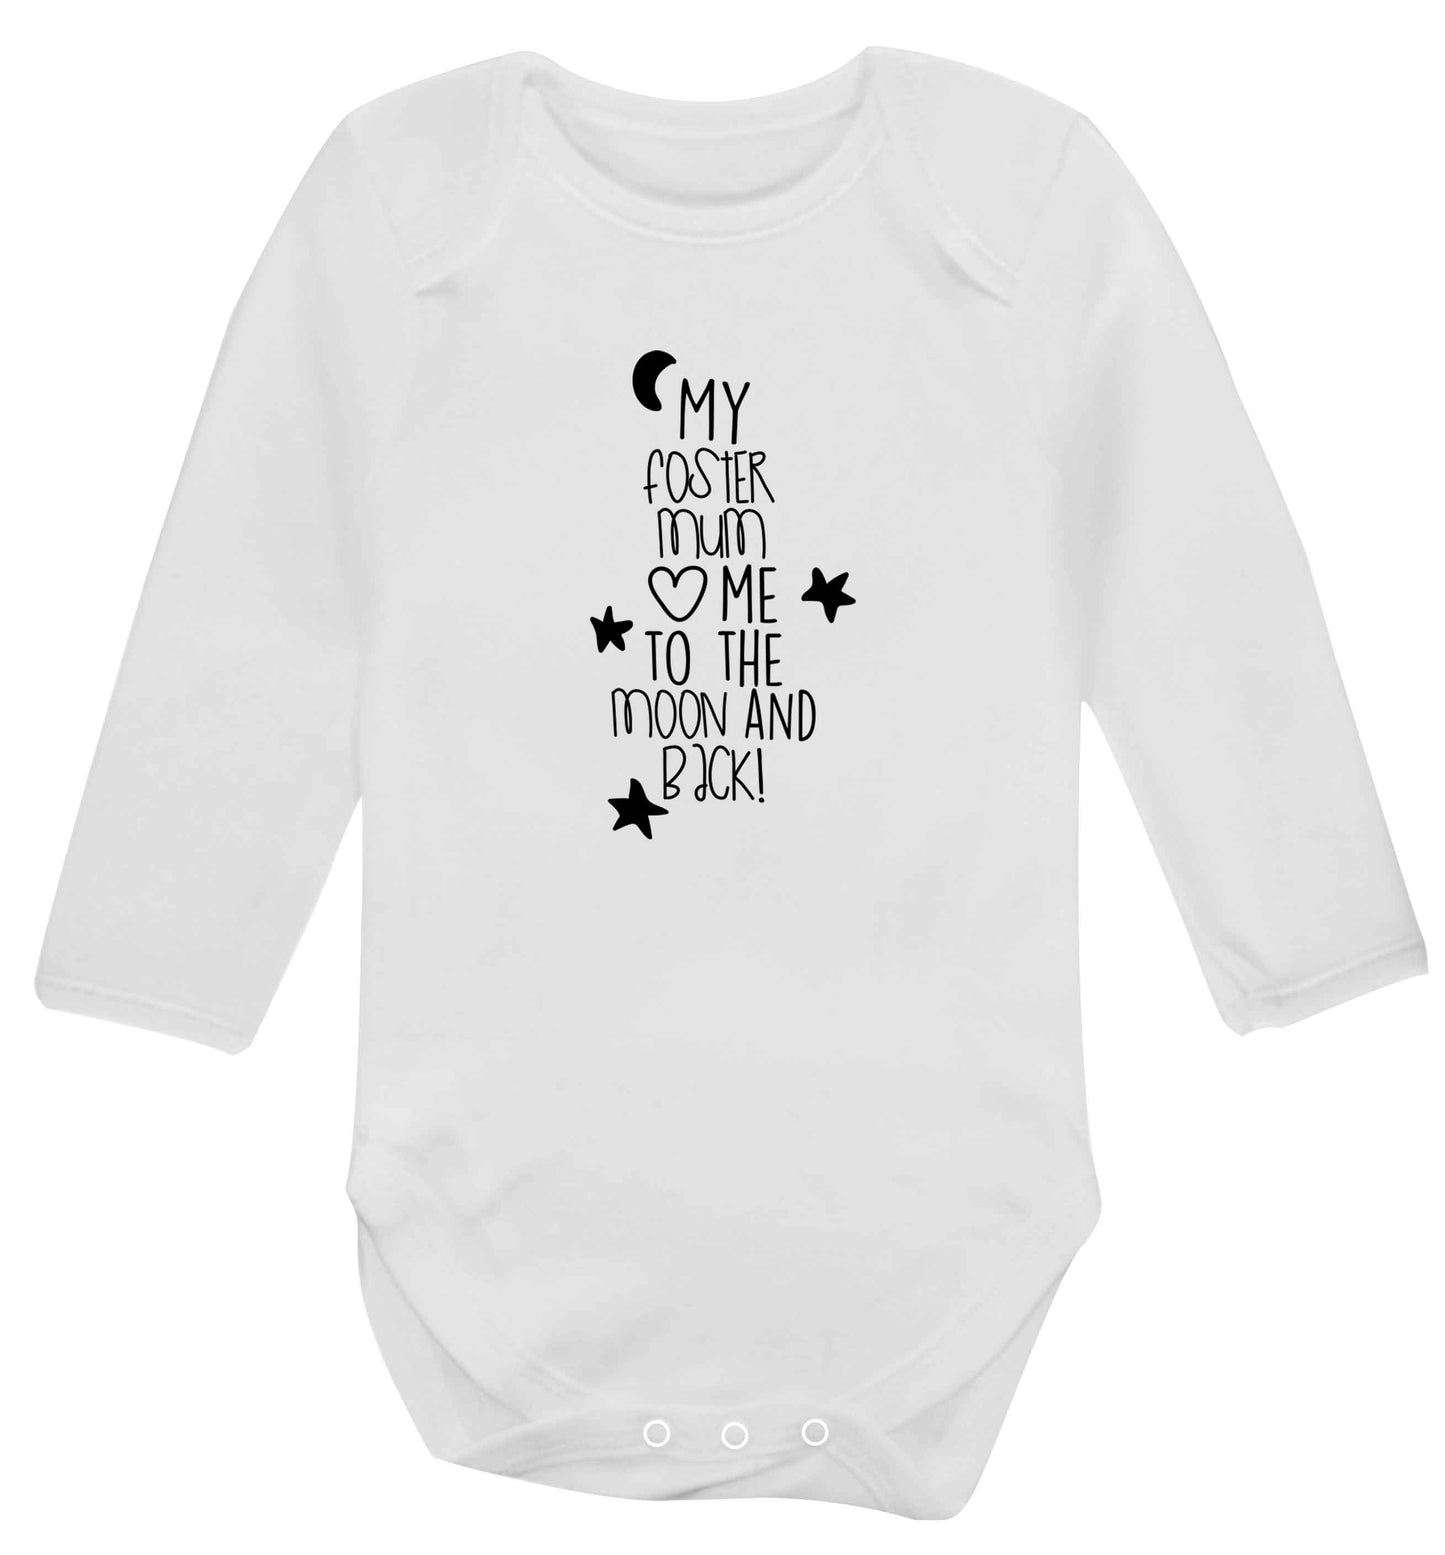 My foster mum loves me to the moon and back baby vest long sleeved white 6-12 months